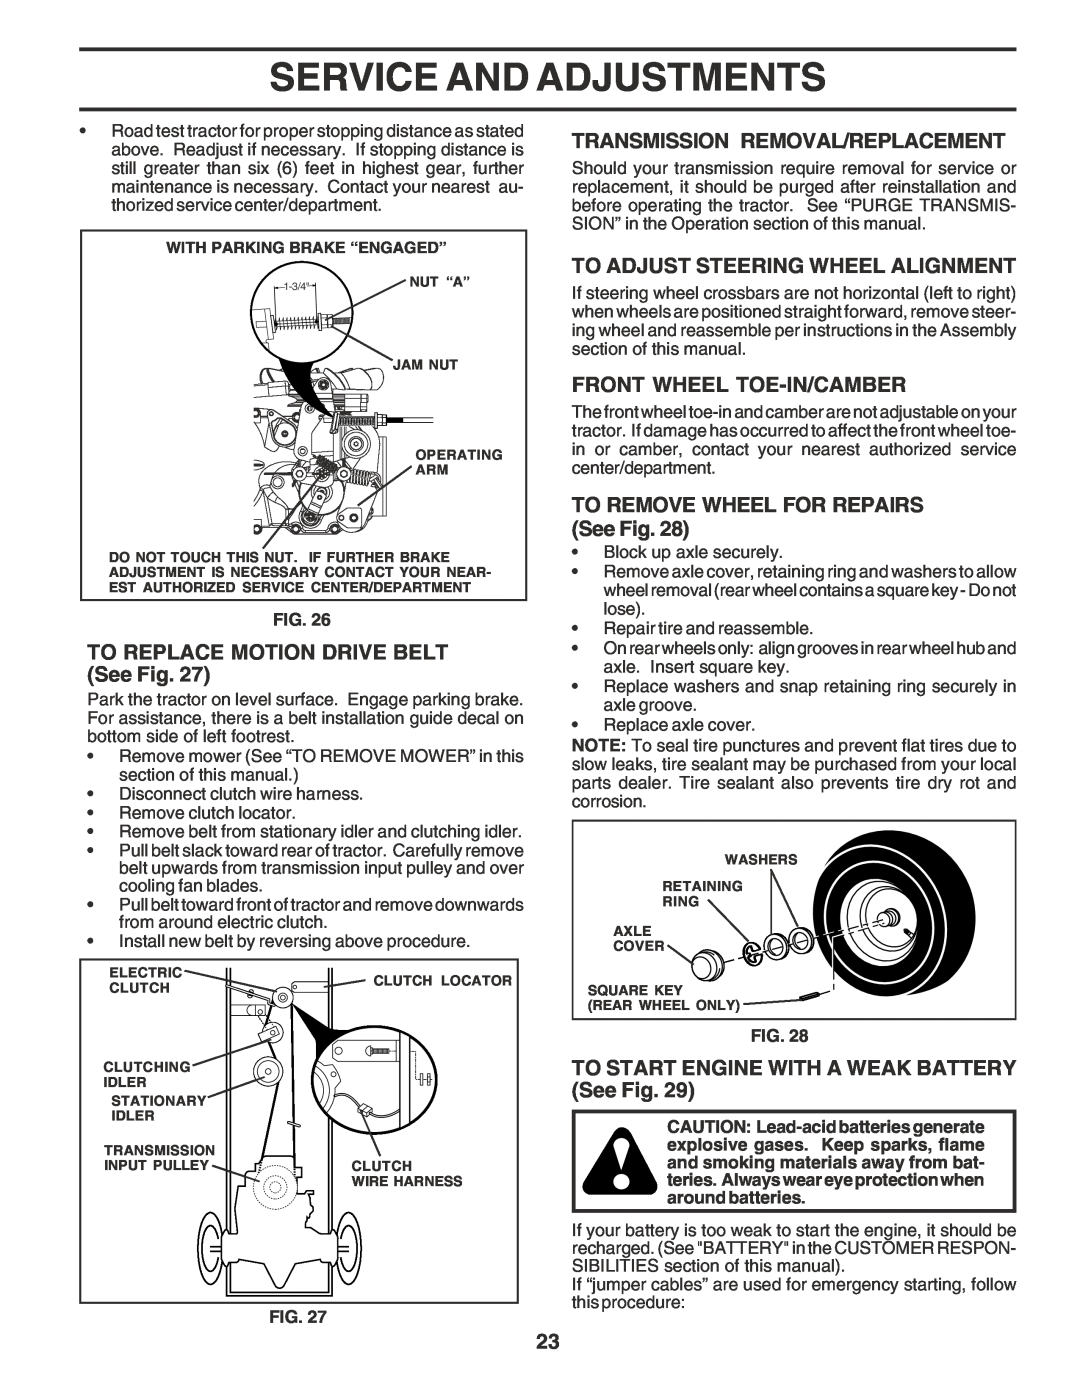 Poulan 183050 TO REPLACE MOTION DRIVE BELT See Fig, Transmission Removal/Replacement, To Adjust Steering Wheel Alignment 